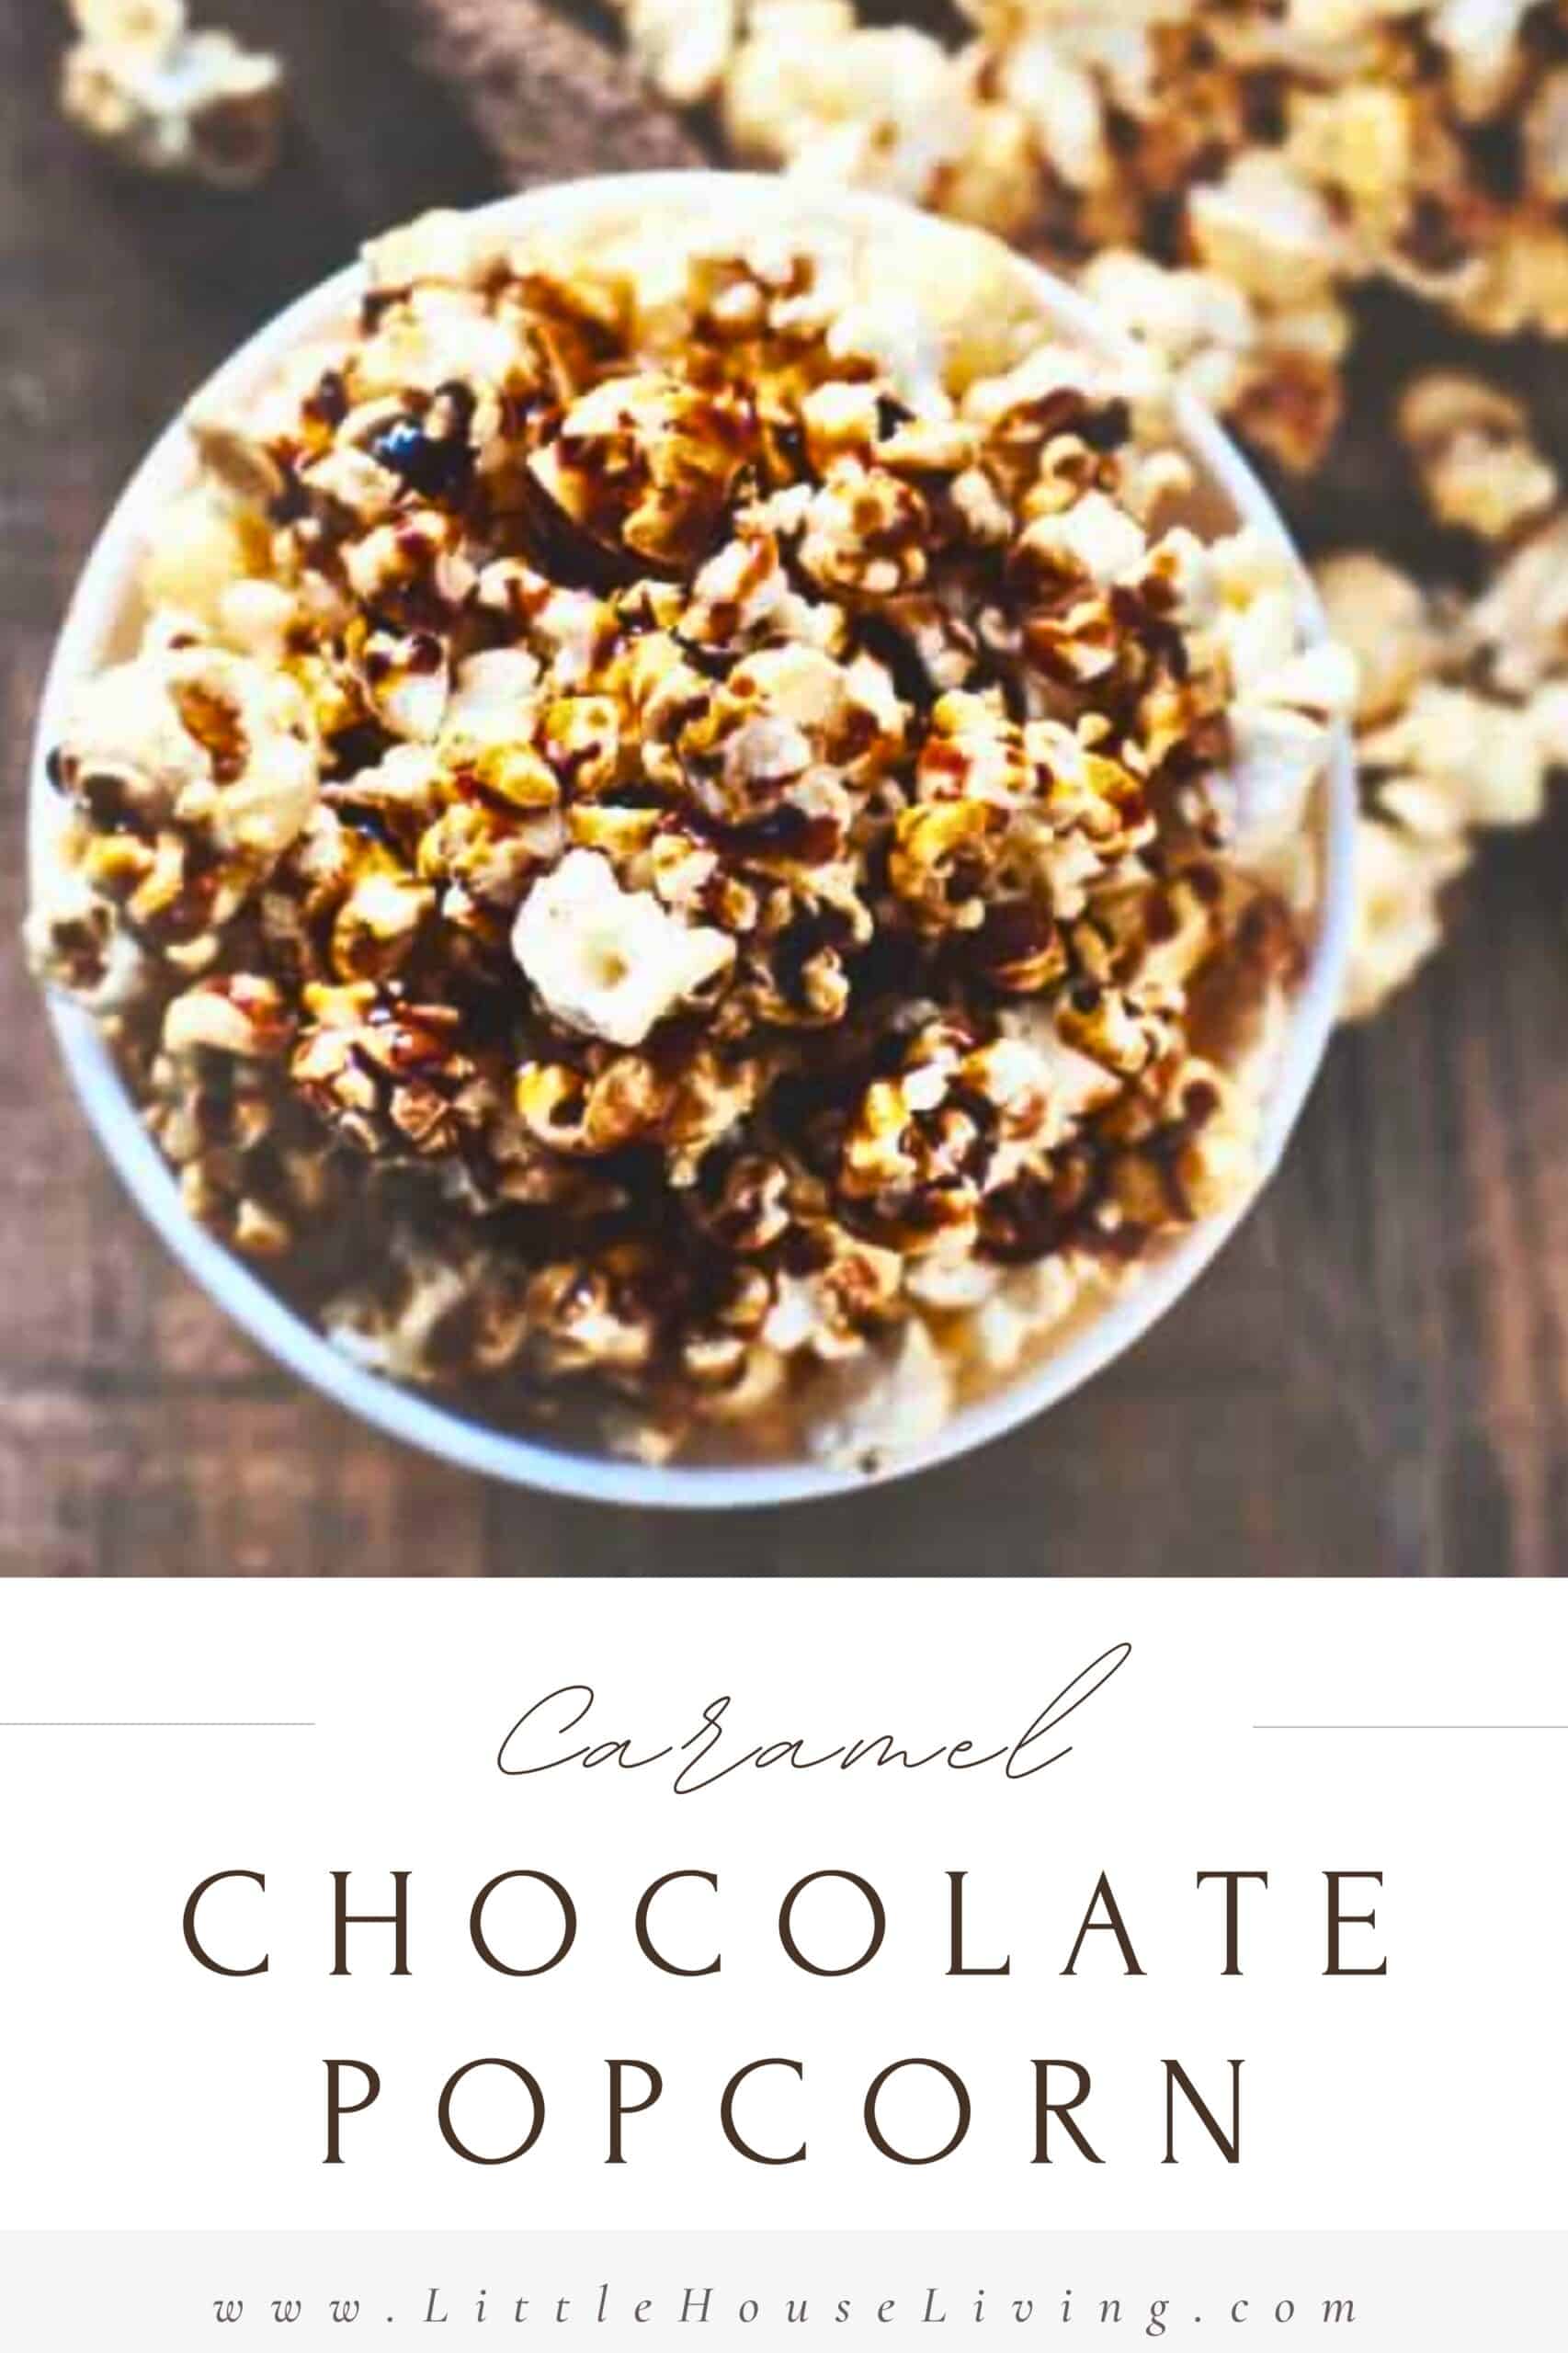 We love to enjoy popcorn as a snack, but this Caramel Chocolate Popcorn takes this ordinary treat to a new level. Covered in caramel and warm chocolate, everyone will want some!